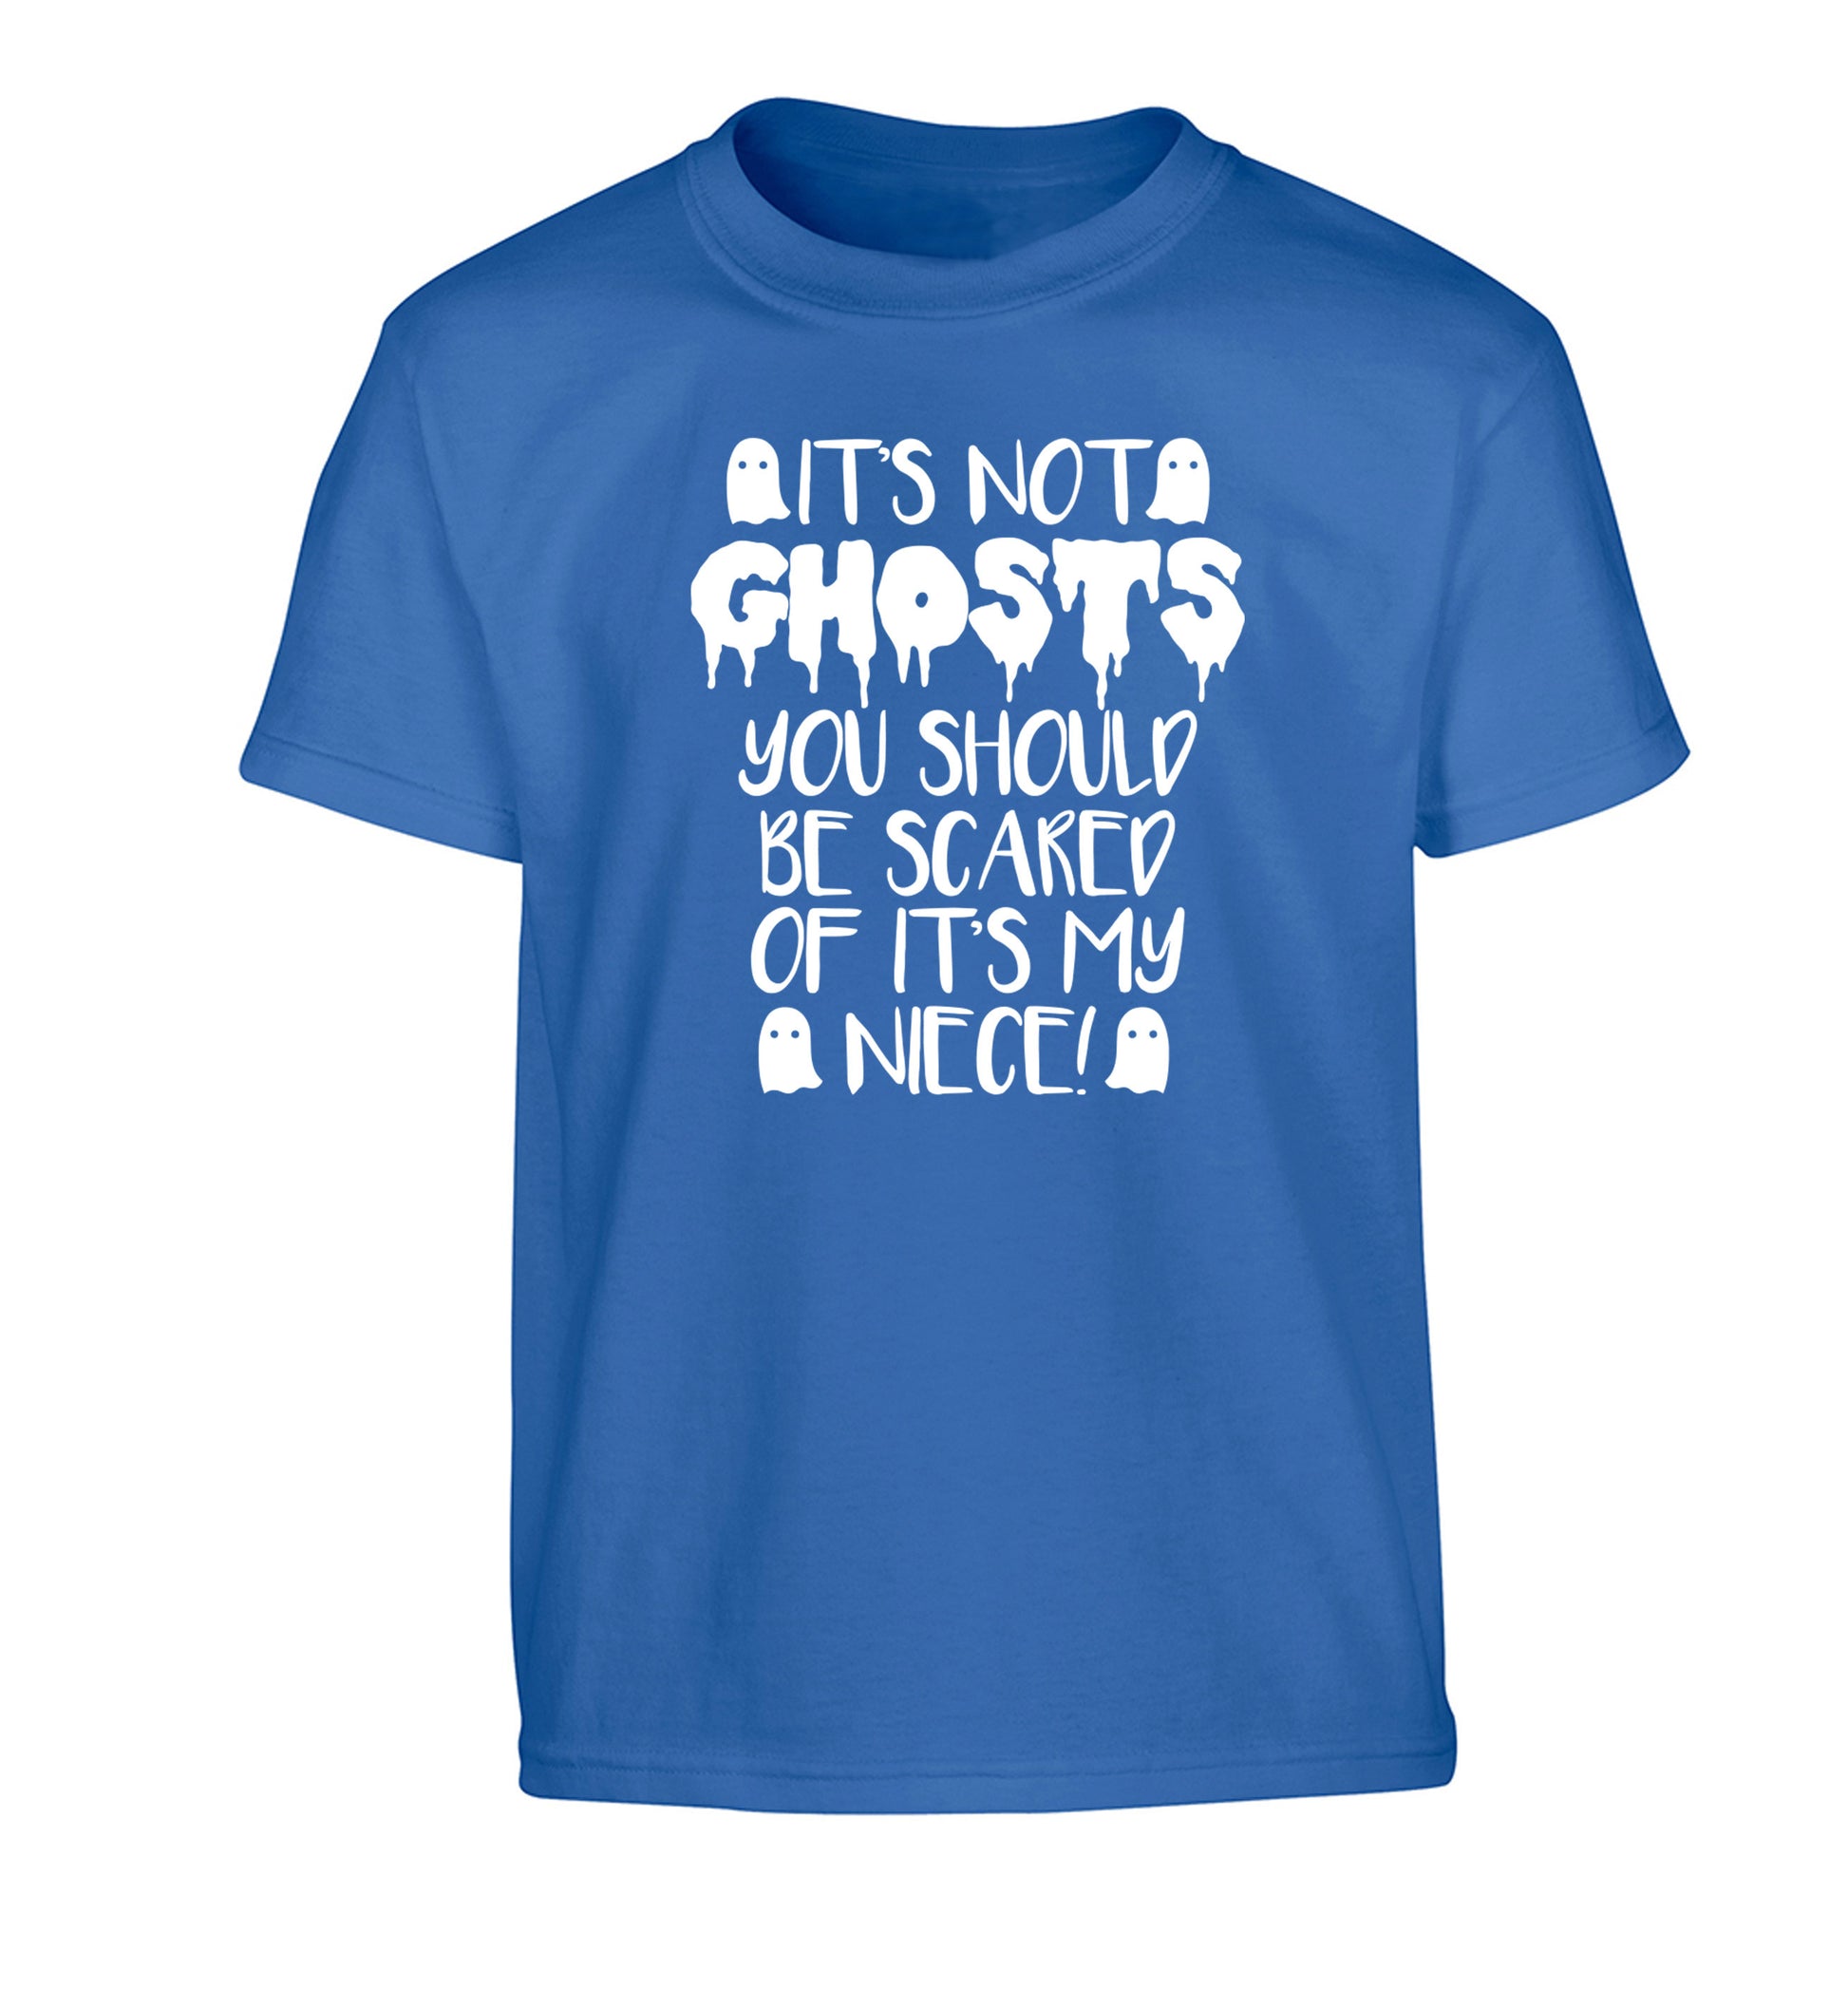 It's not ghosts you should be scared of it's my niece! Children's blue Tshirt 12-14 Years